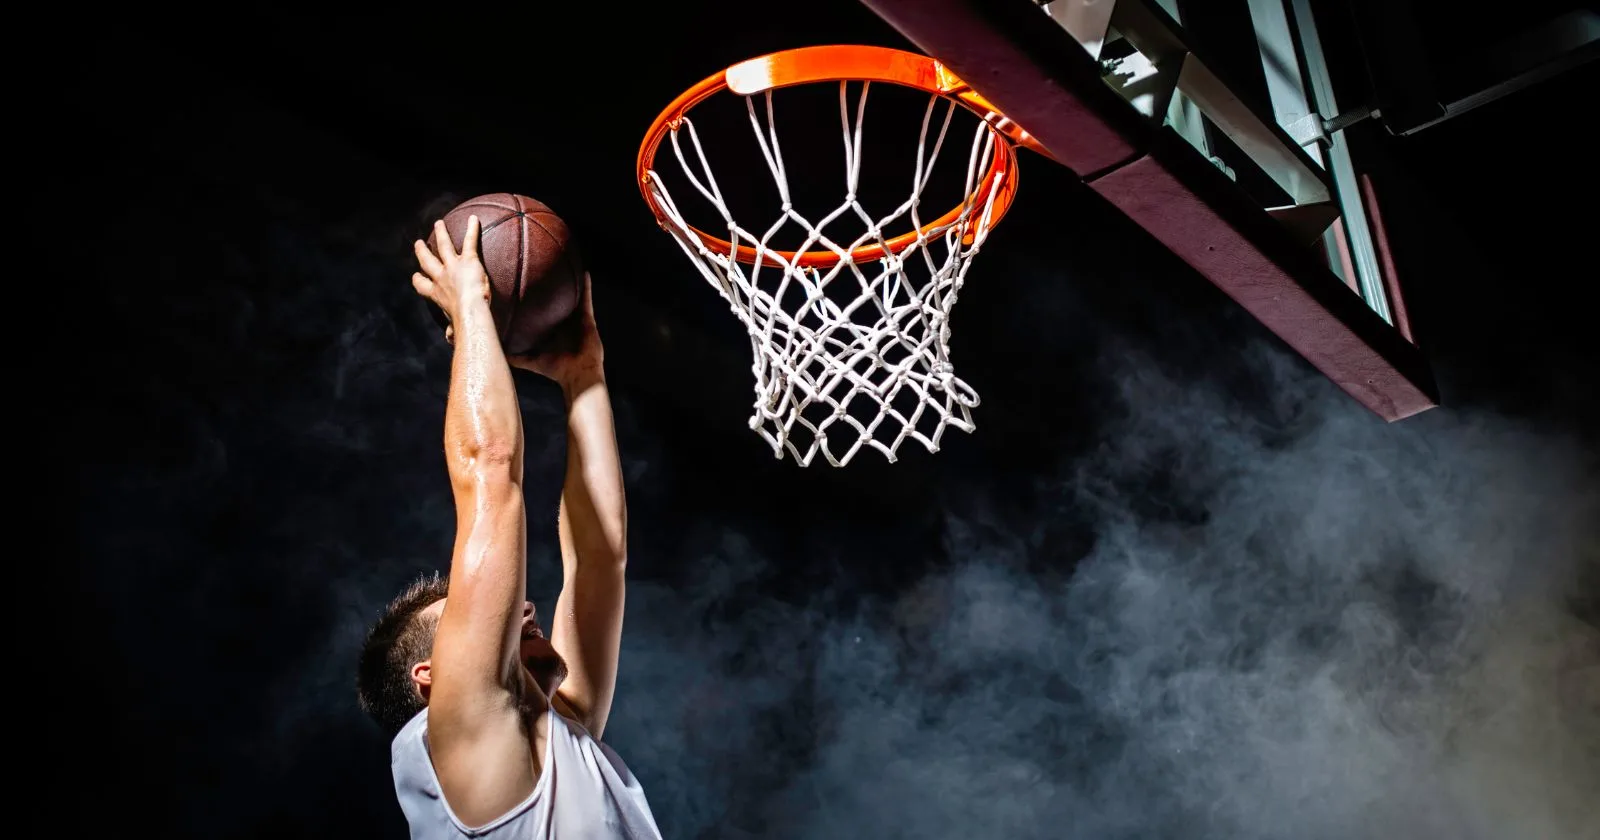 March Madness Fan Fervor: Survey Reveals The Impact On Daily Life And Loyalty By Tipico Sportsbook